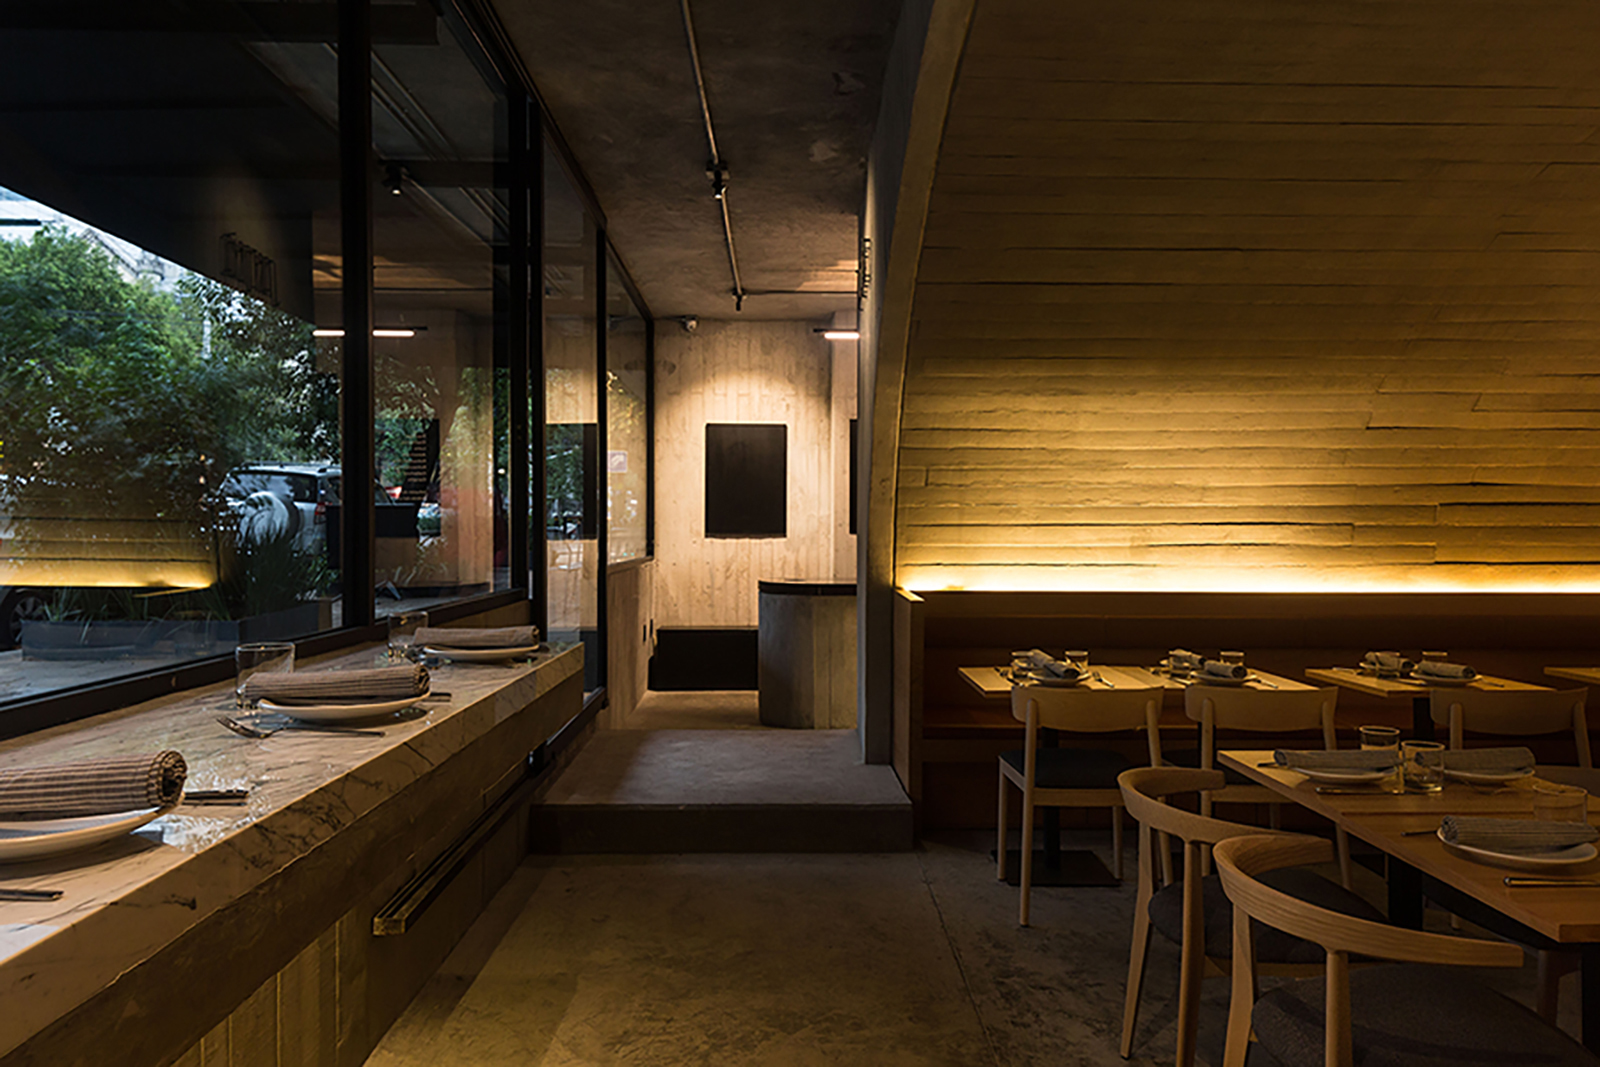 Sartoria offers a contemporary take on Europe's vaulted taverns, serving fresh pasta inside a glowing concrete tunnel in Mexico City's Roma Norte neighbourhood.